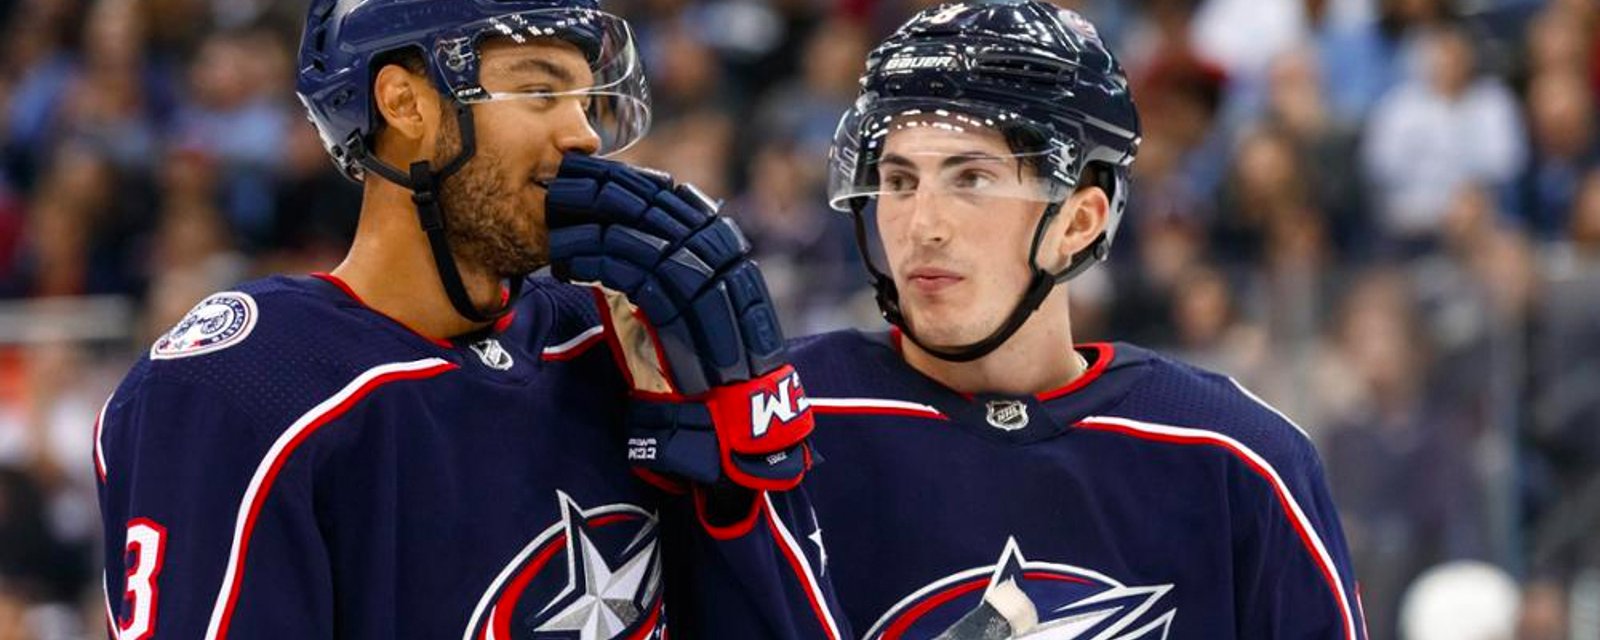 Despite multiple positive cases on the team, Blue Jackets players promote COVID-19 hoax propaganda